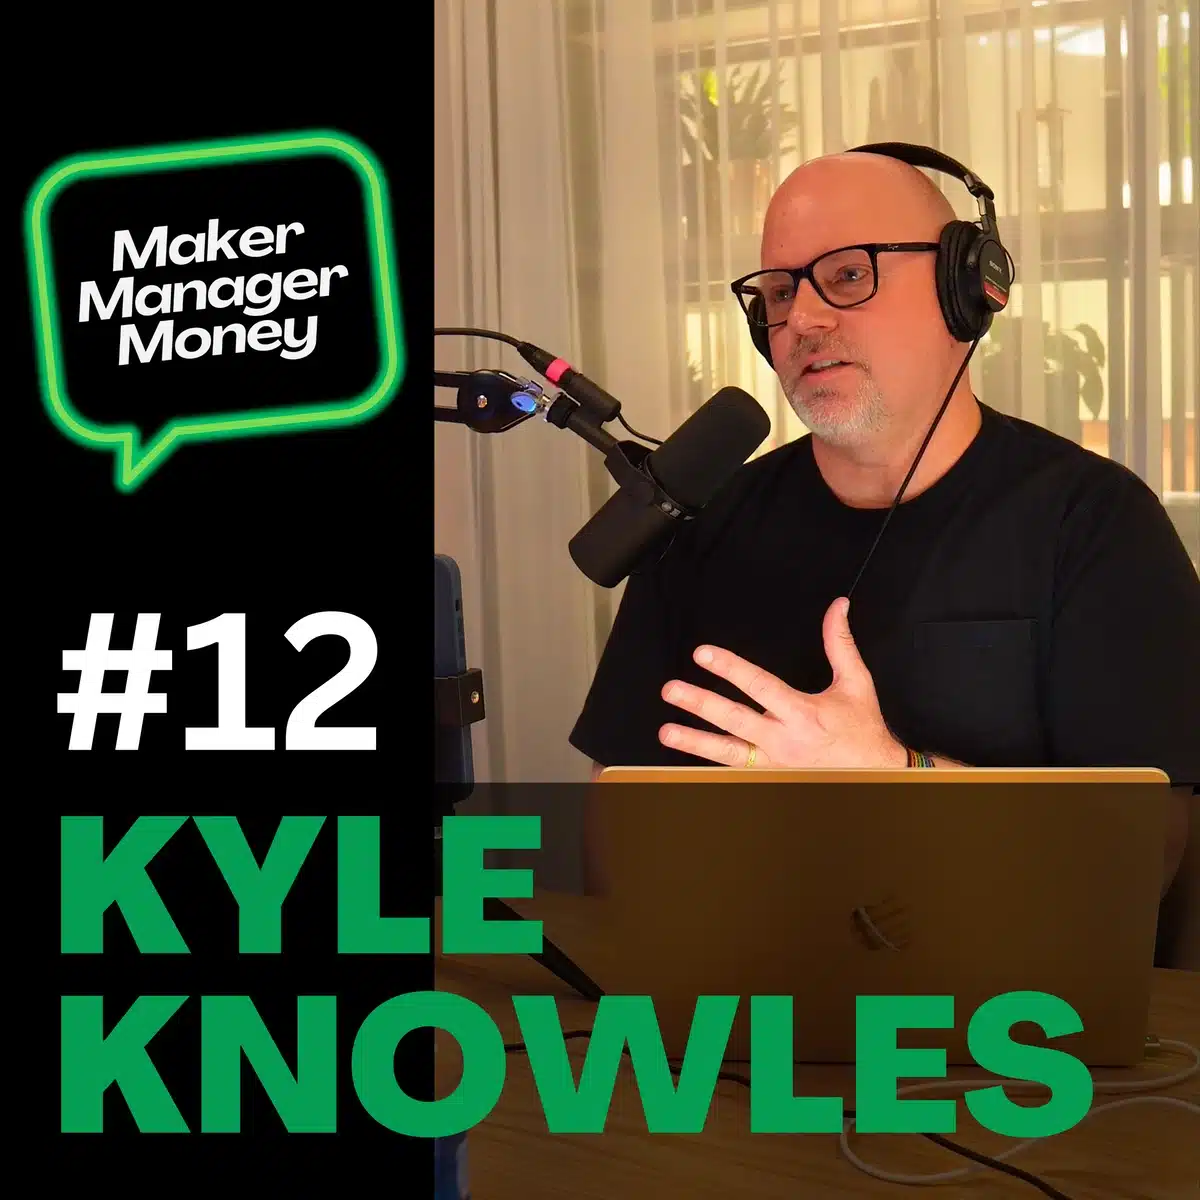 Kyle Knowles – learnings from the first 11 episodes